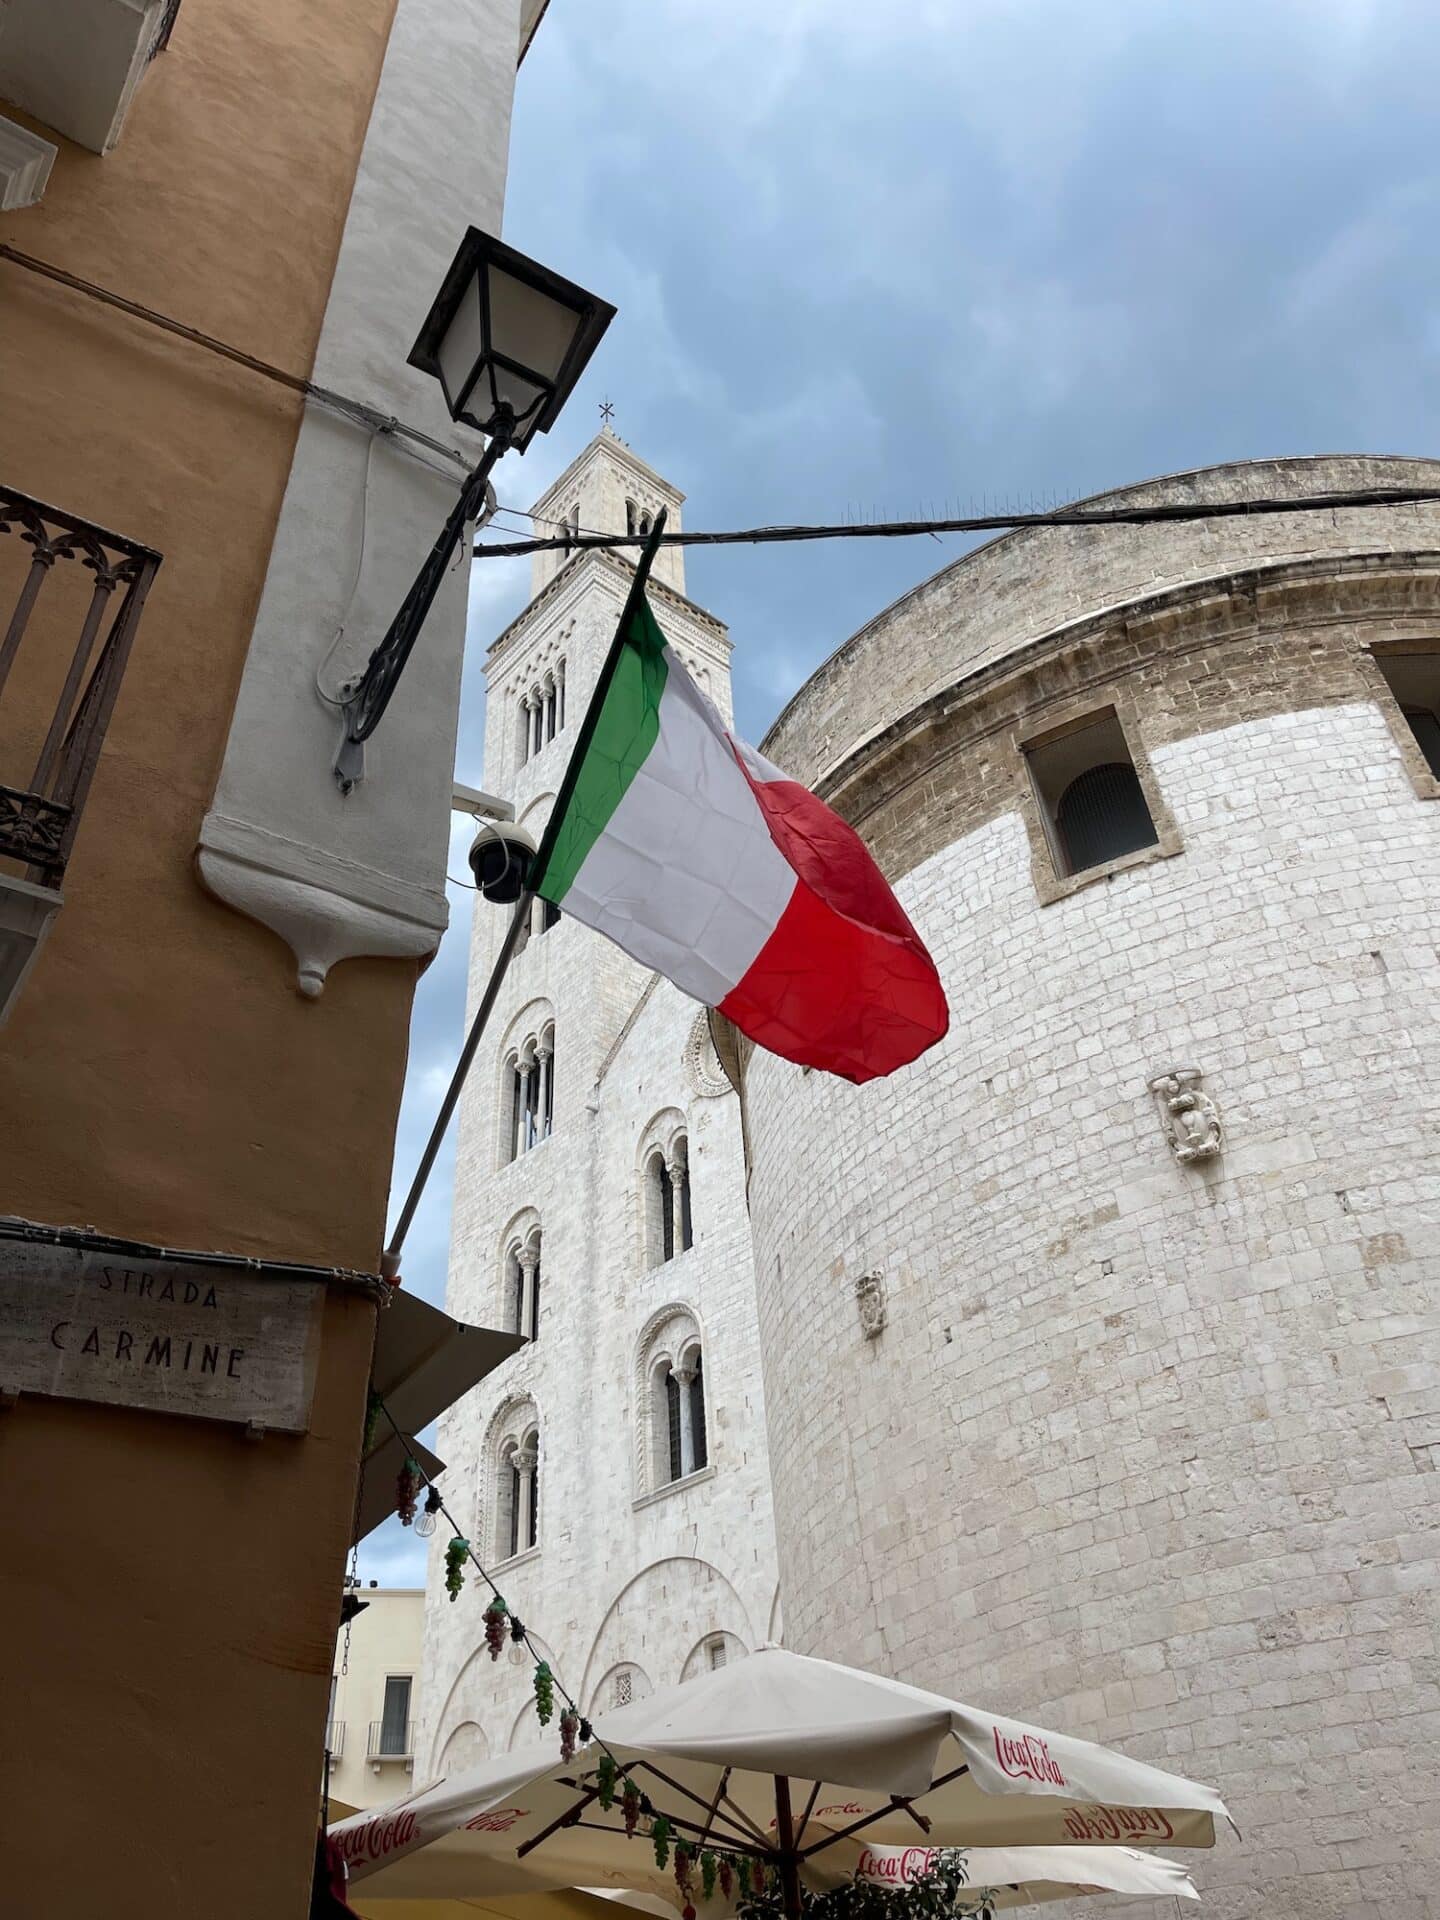 An Italian flag waves in the wind with the Basilica of San Nicola in the background. The basilica's white stone facade and tower are visible against a cloudy sky. A street sign for 'Strada Carmine' is also seen on the wall.